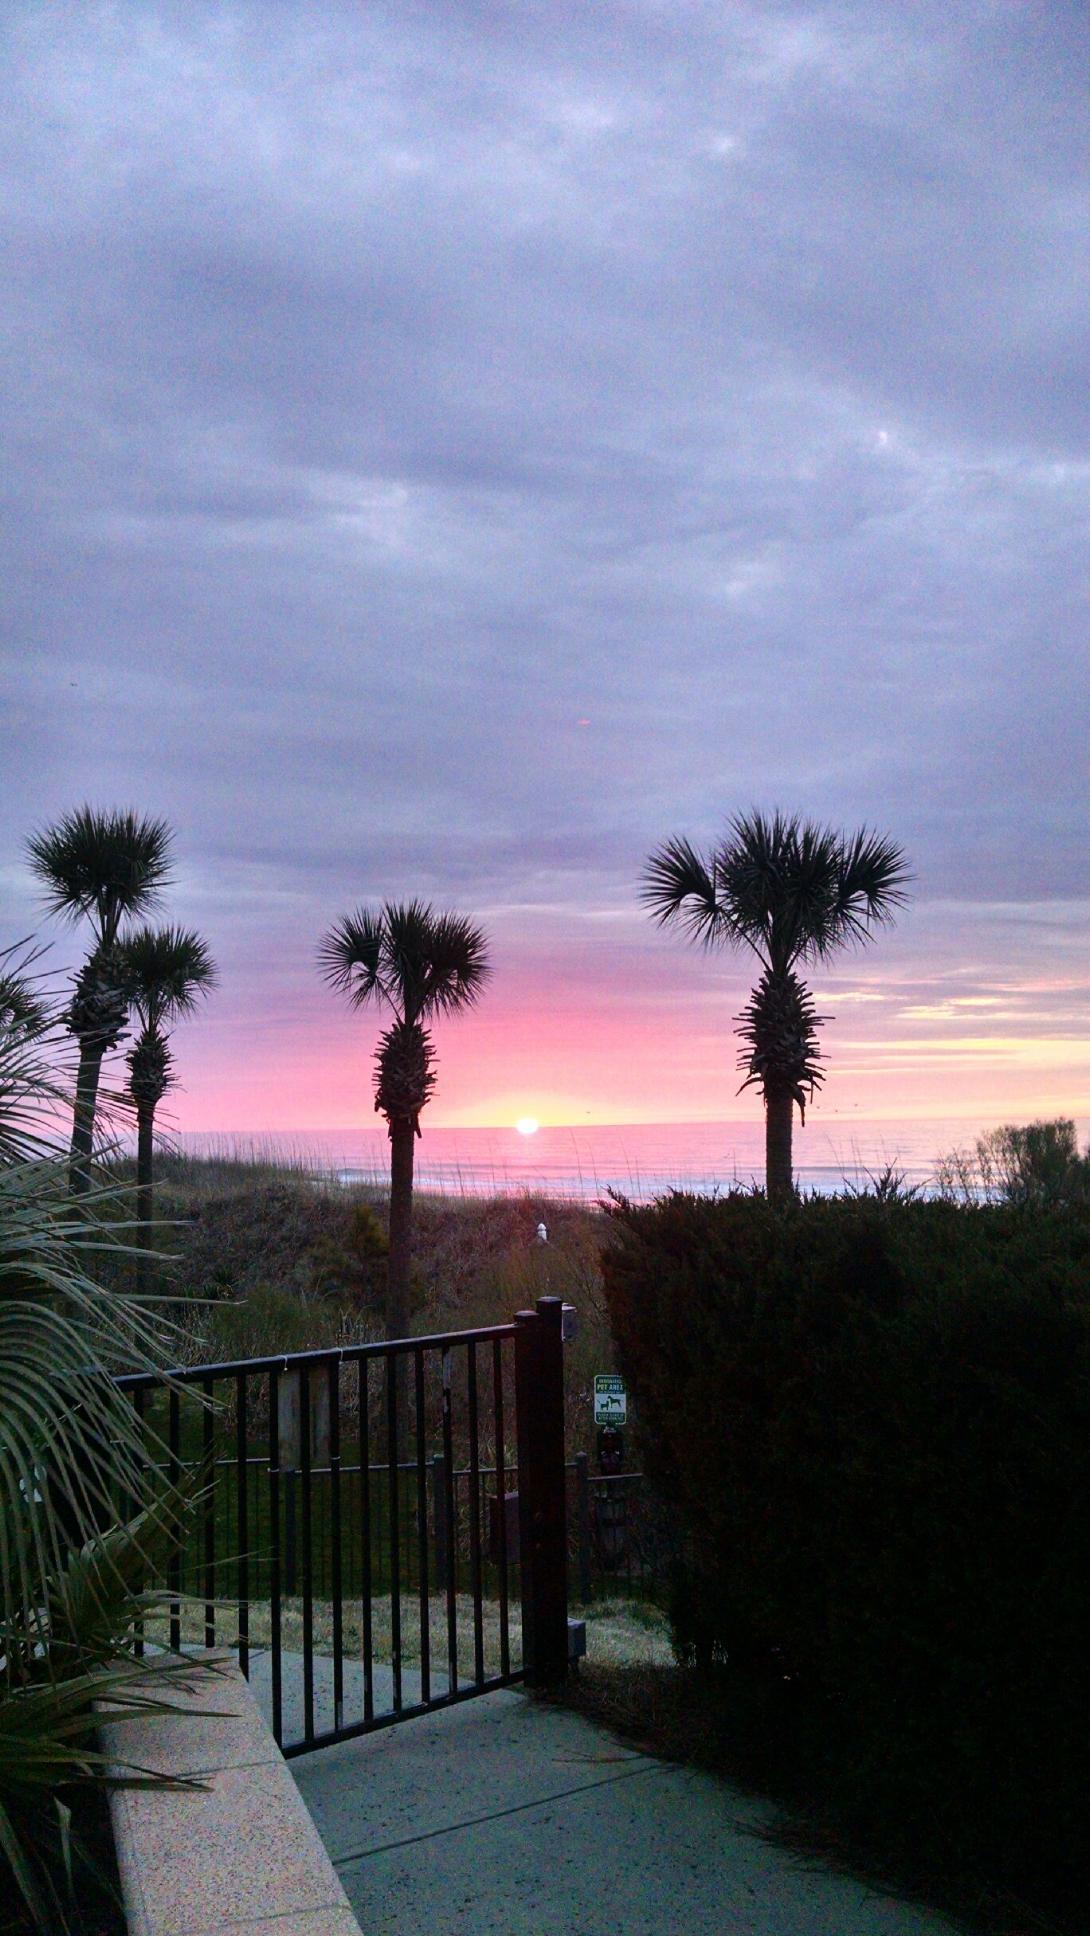 Imagine waking up to this every day!  When you are ready, I am here to help you find your Oceanfront Dream Property!